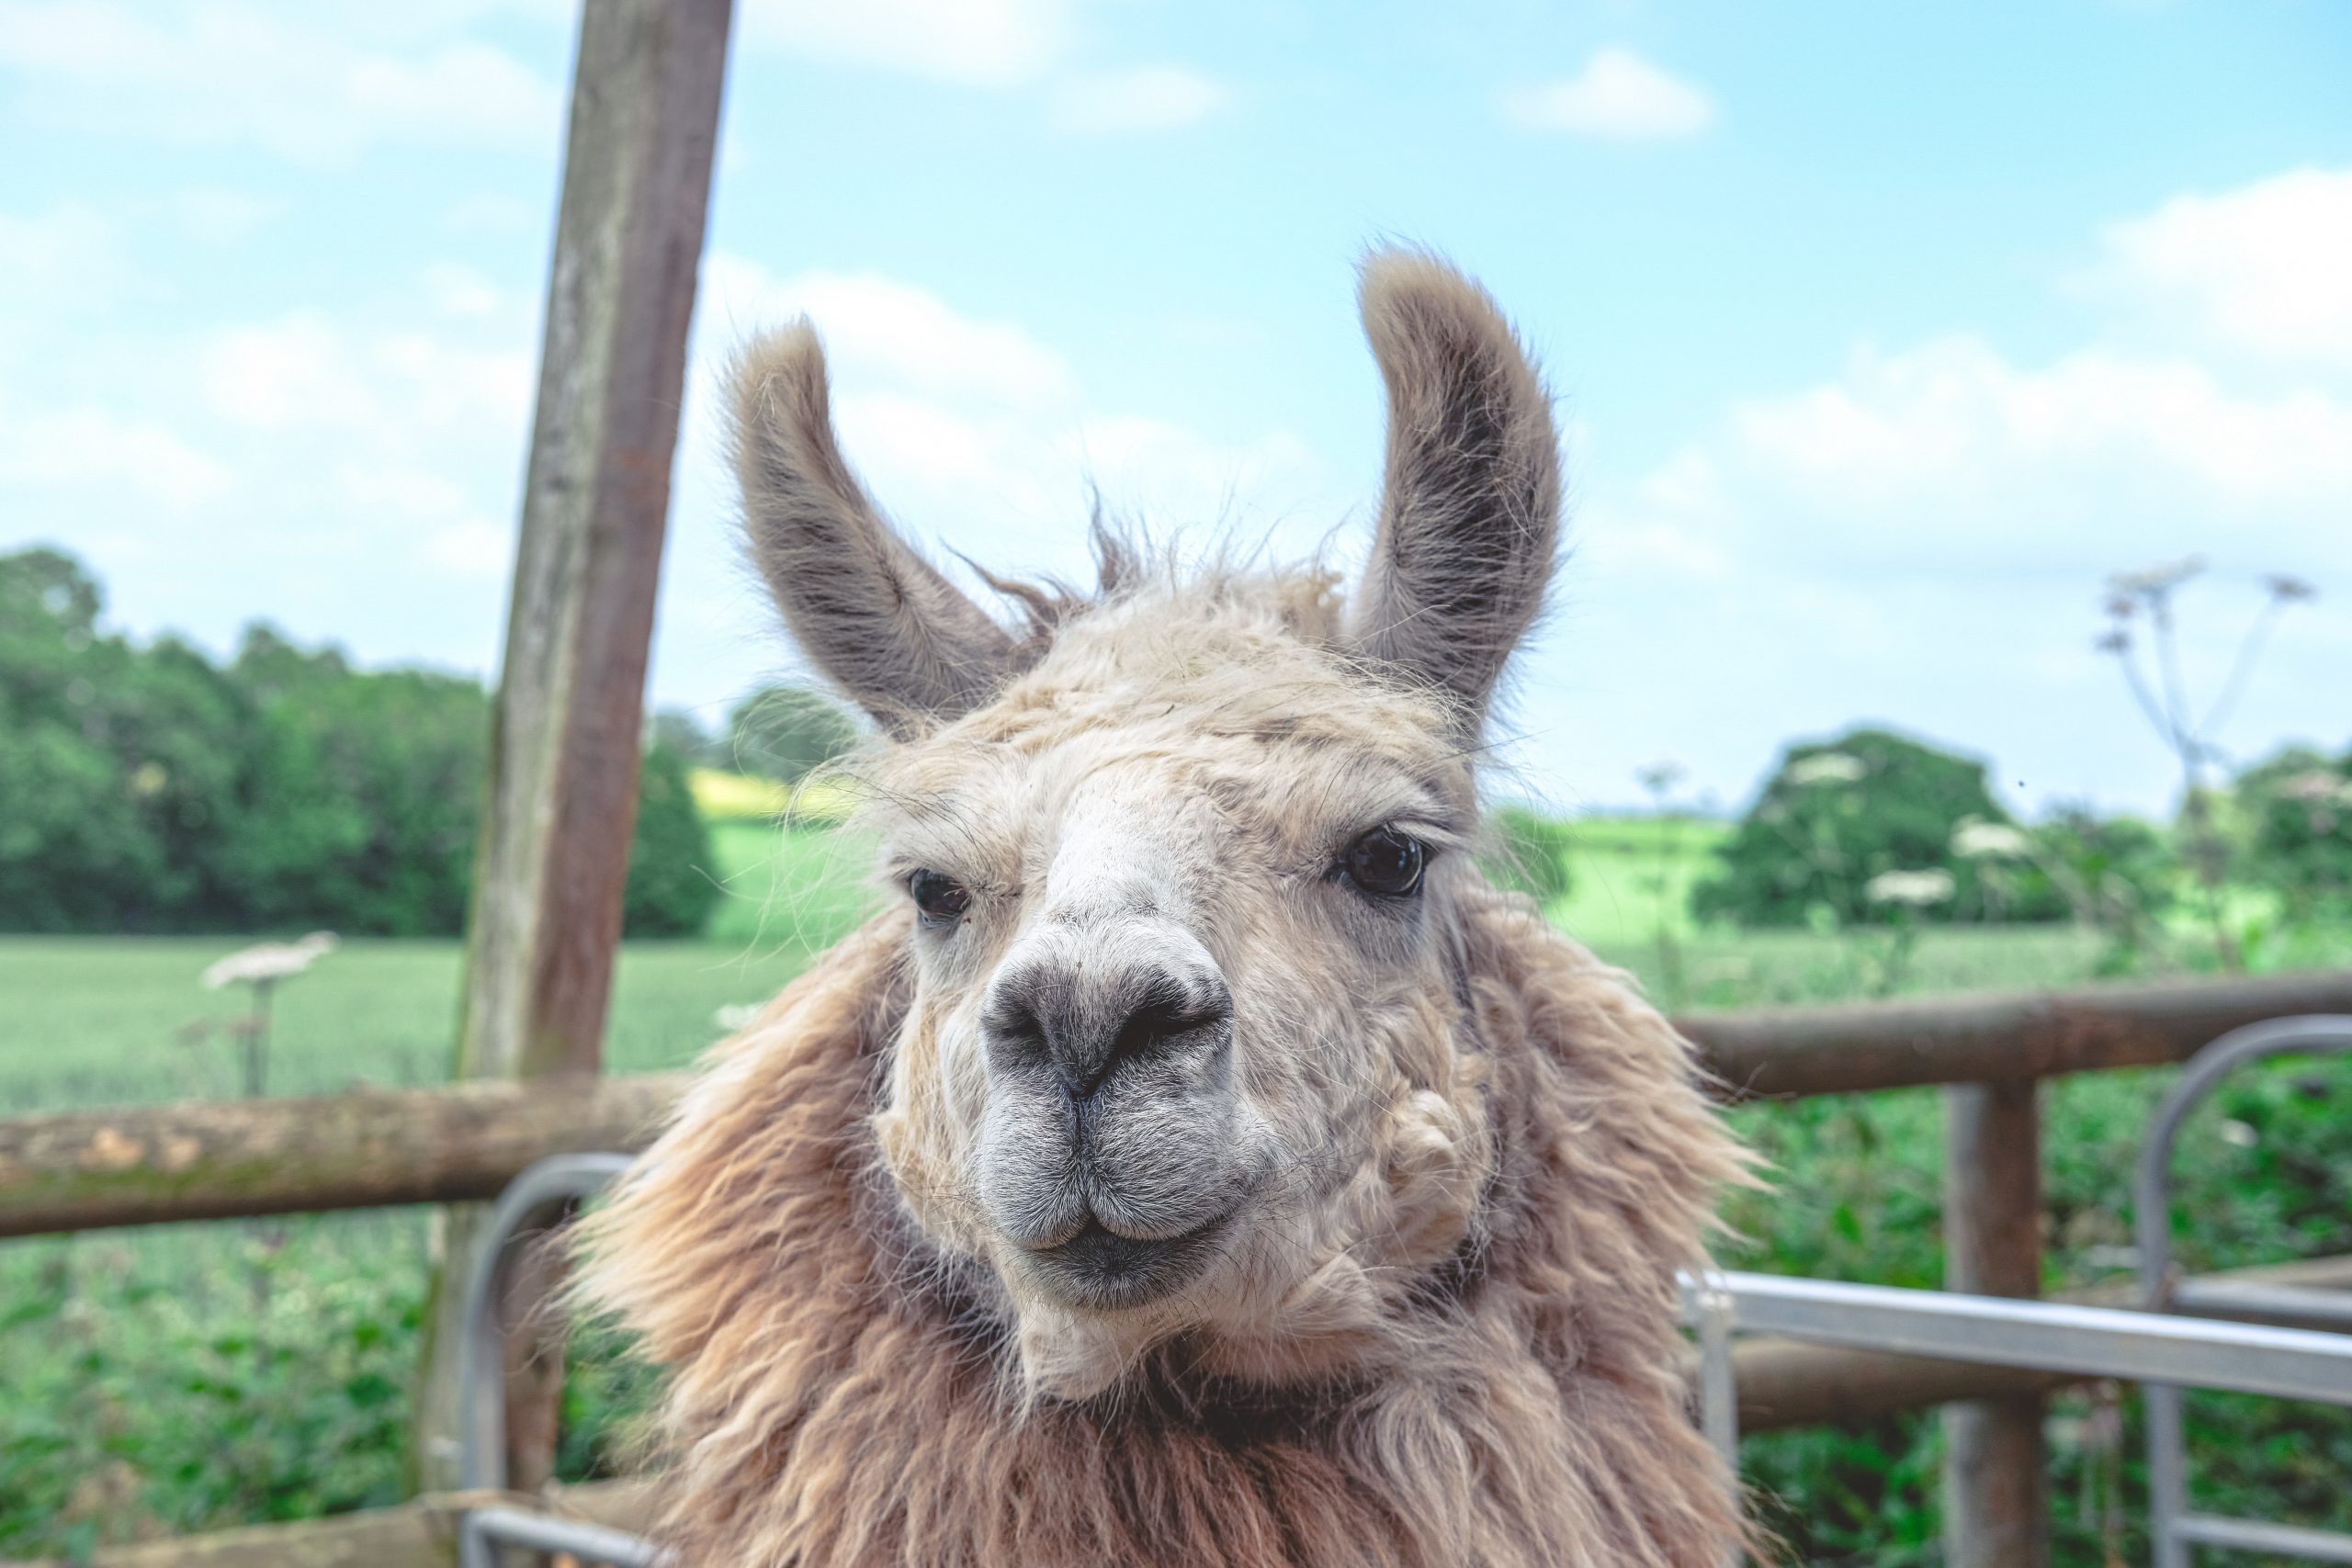 Best things to do in Gloucestershire - go on a llama experience